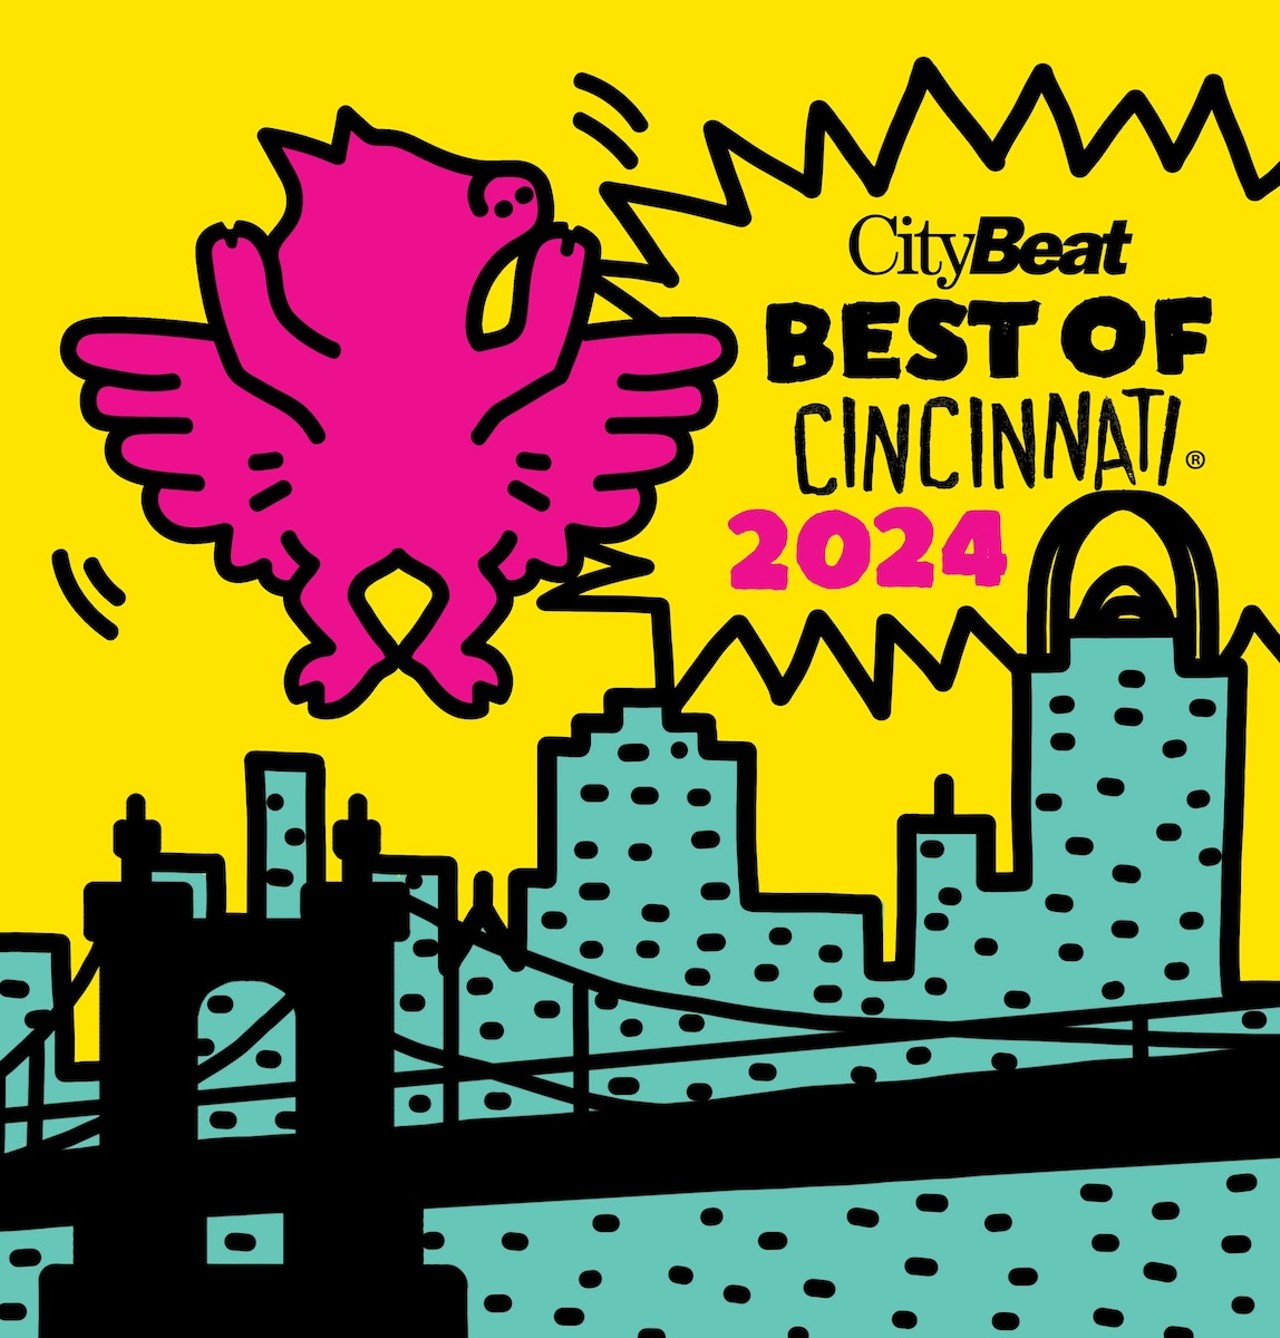 CityBeat's Best Of Cincinnati Event
When: April 11 from 5:30-8:30 p.m.
Where: The Palomar, Walnut Hills
What: A gathering of all things Cincinnati featuring food, drink, entertainment and fun.
Who: CityBeat
Why: It's the 28th celebration of greatness in our city.